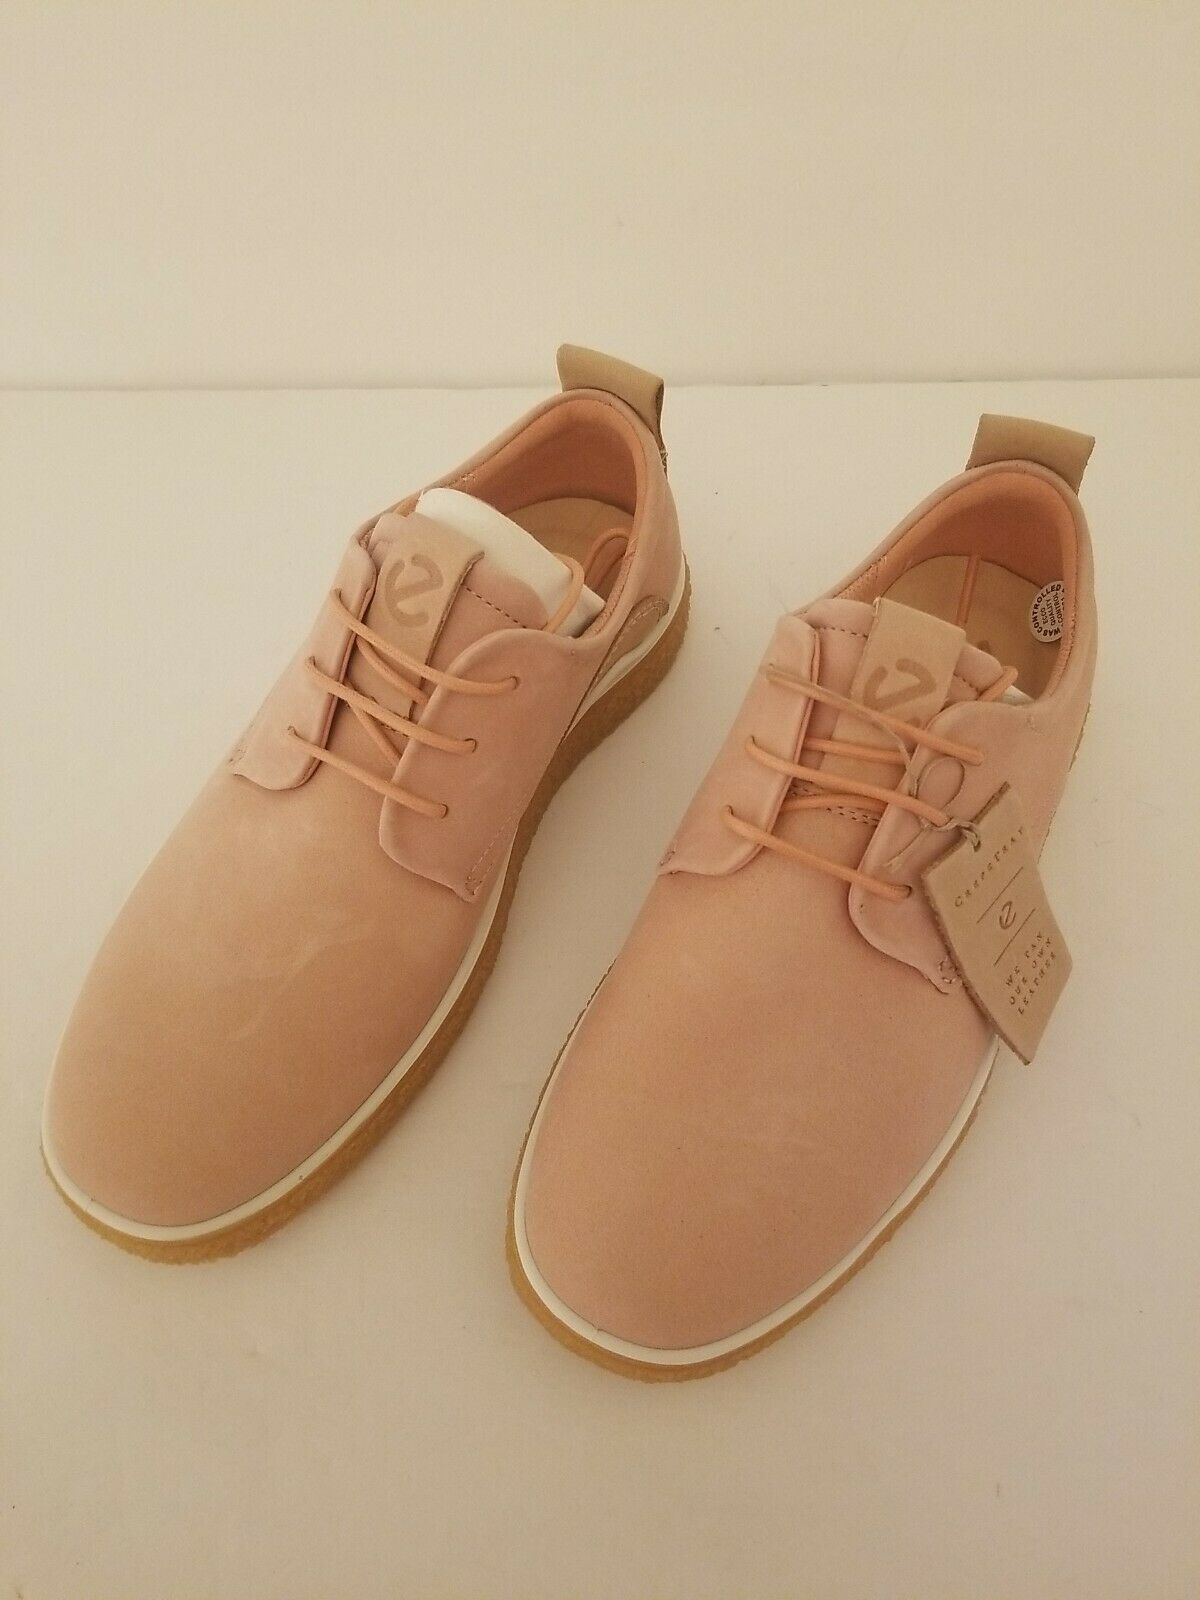 Ecco Crepetray muted clay tan casual shoes women's Sz 4-4.5 US, 36 EUR